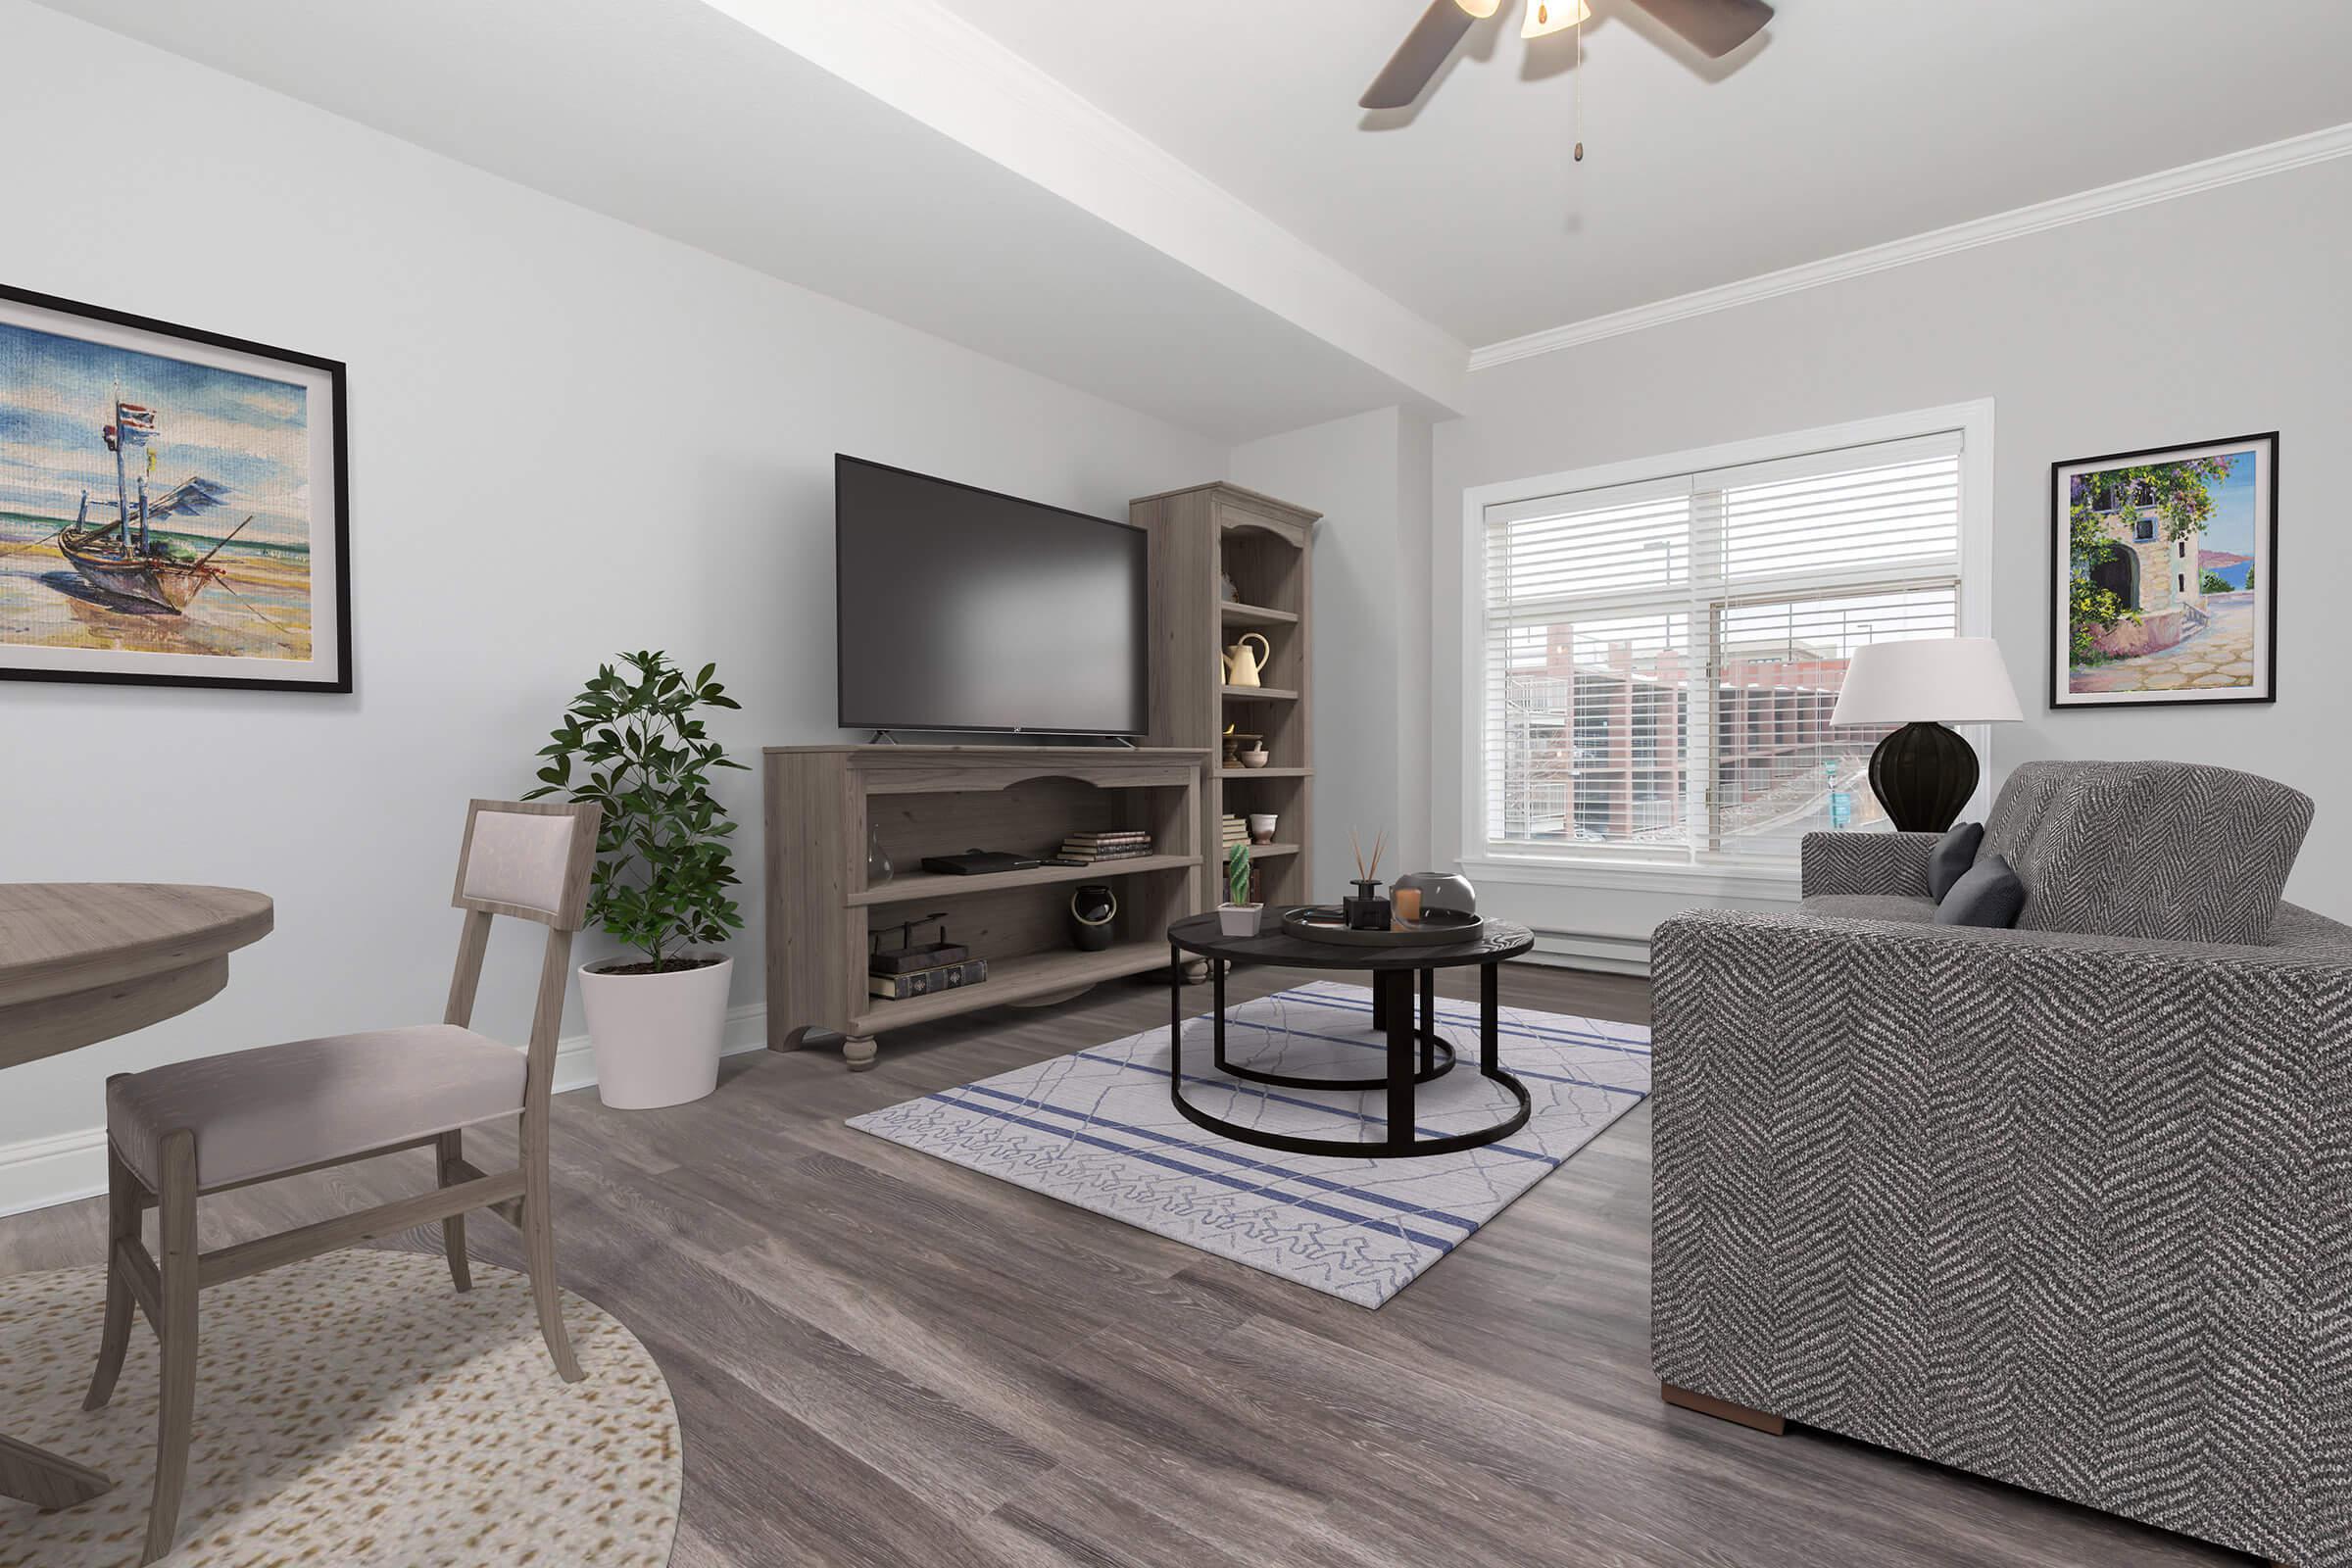 SPACIOUS FLOOR PLANS FOR RENT AT CLEAR CREEK COMMONS